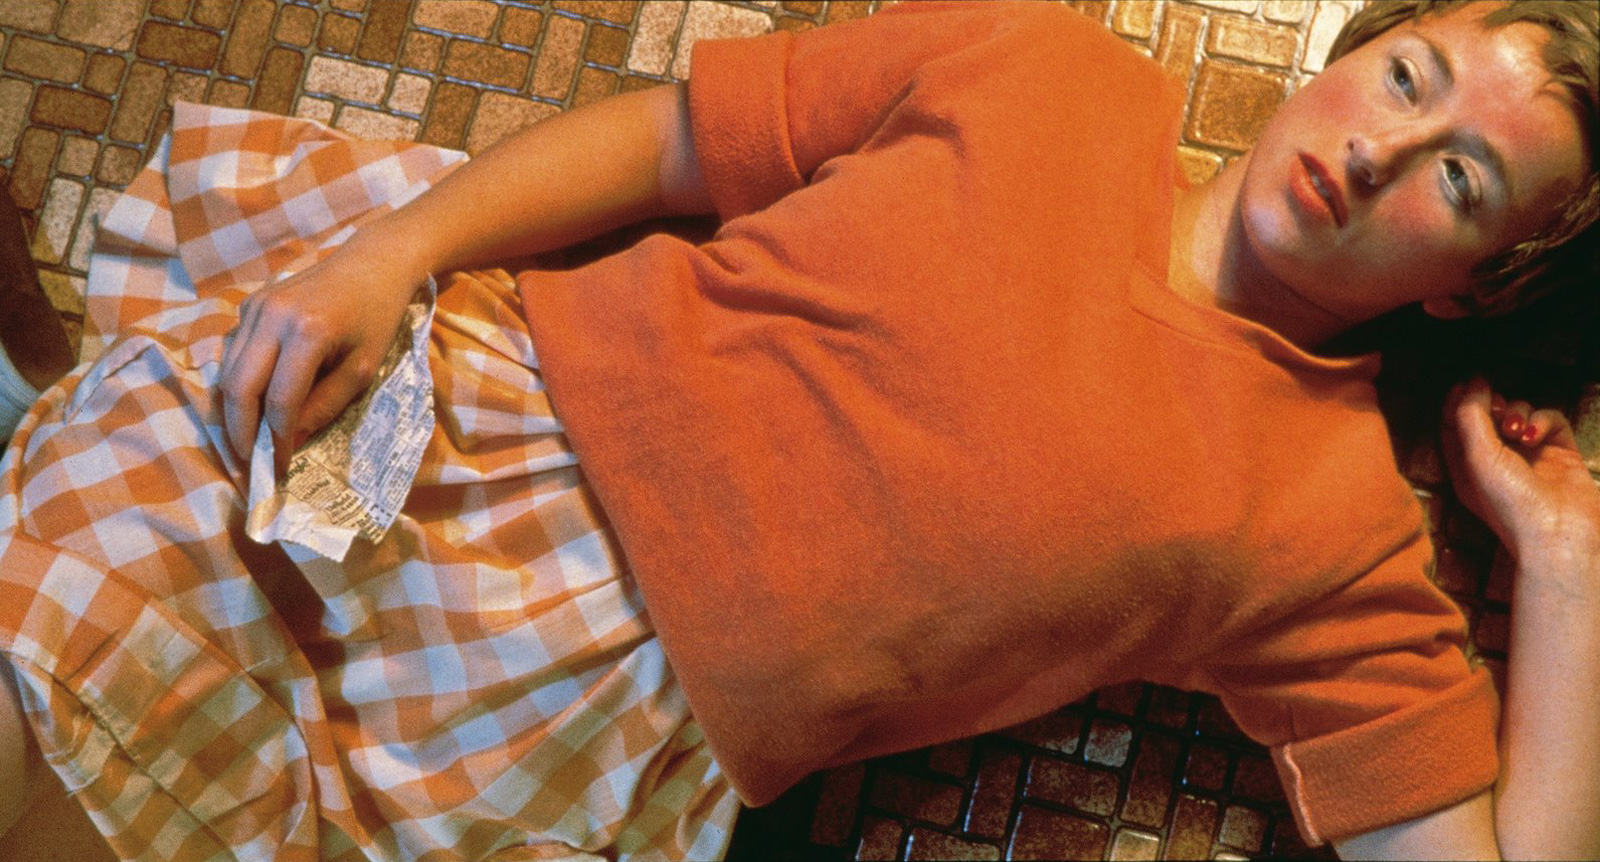 Cindy Sherman's 1981 Photo “Untitled #96″ sold for $3.89 million in May.